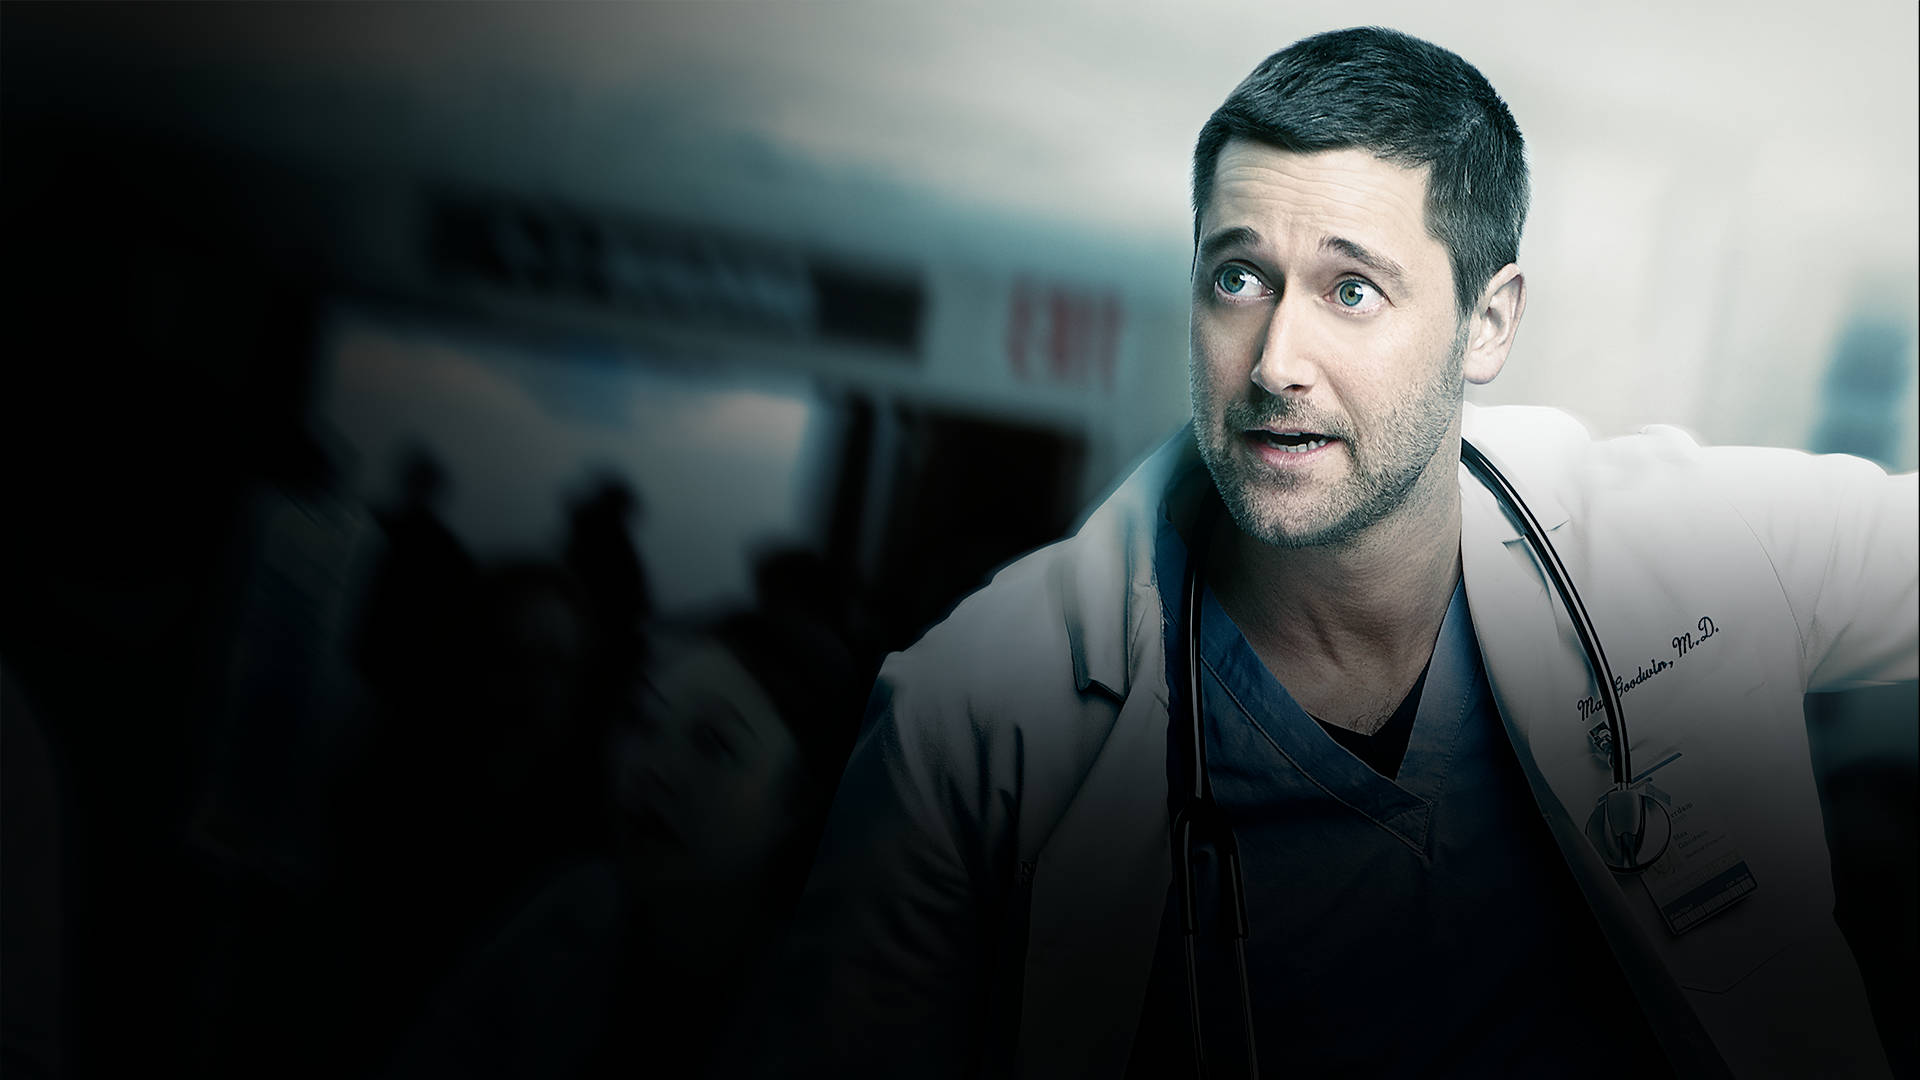 Dr. Max Goodwin (played by Ryan Eggold) in 'New Amsterdam' TV Series. Wallpaper